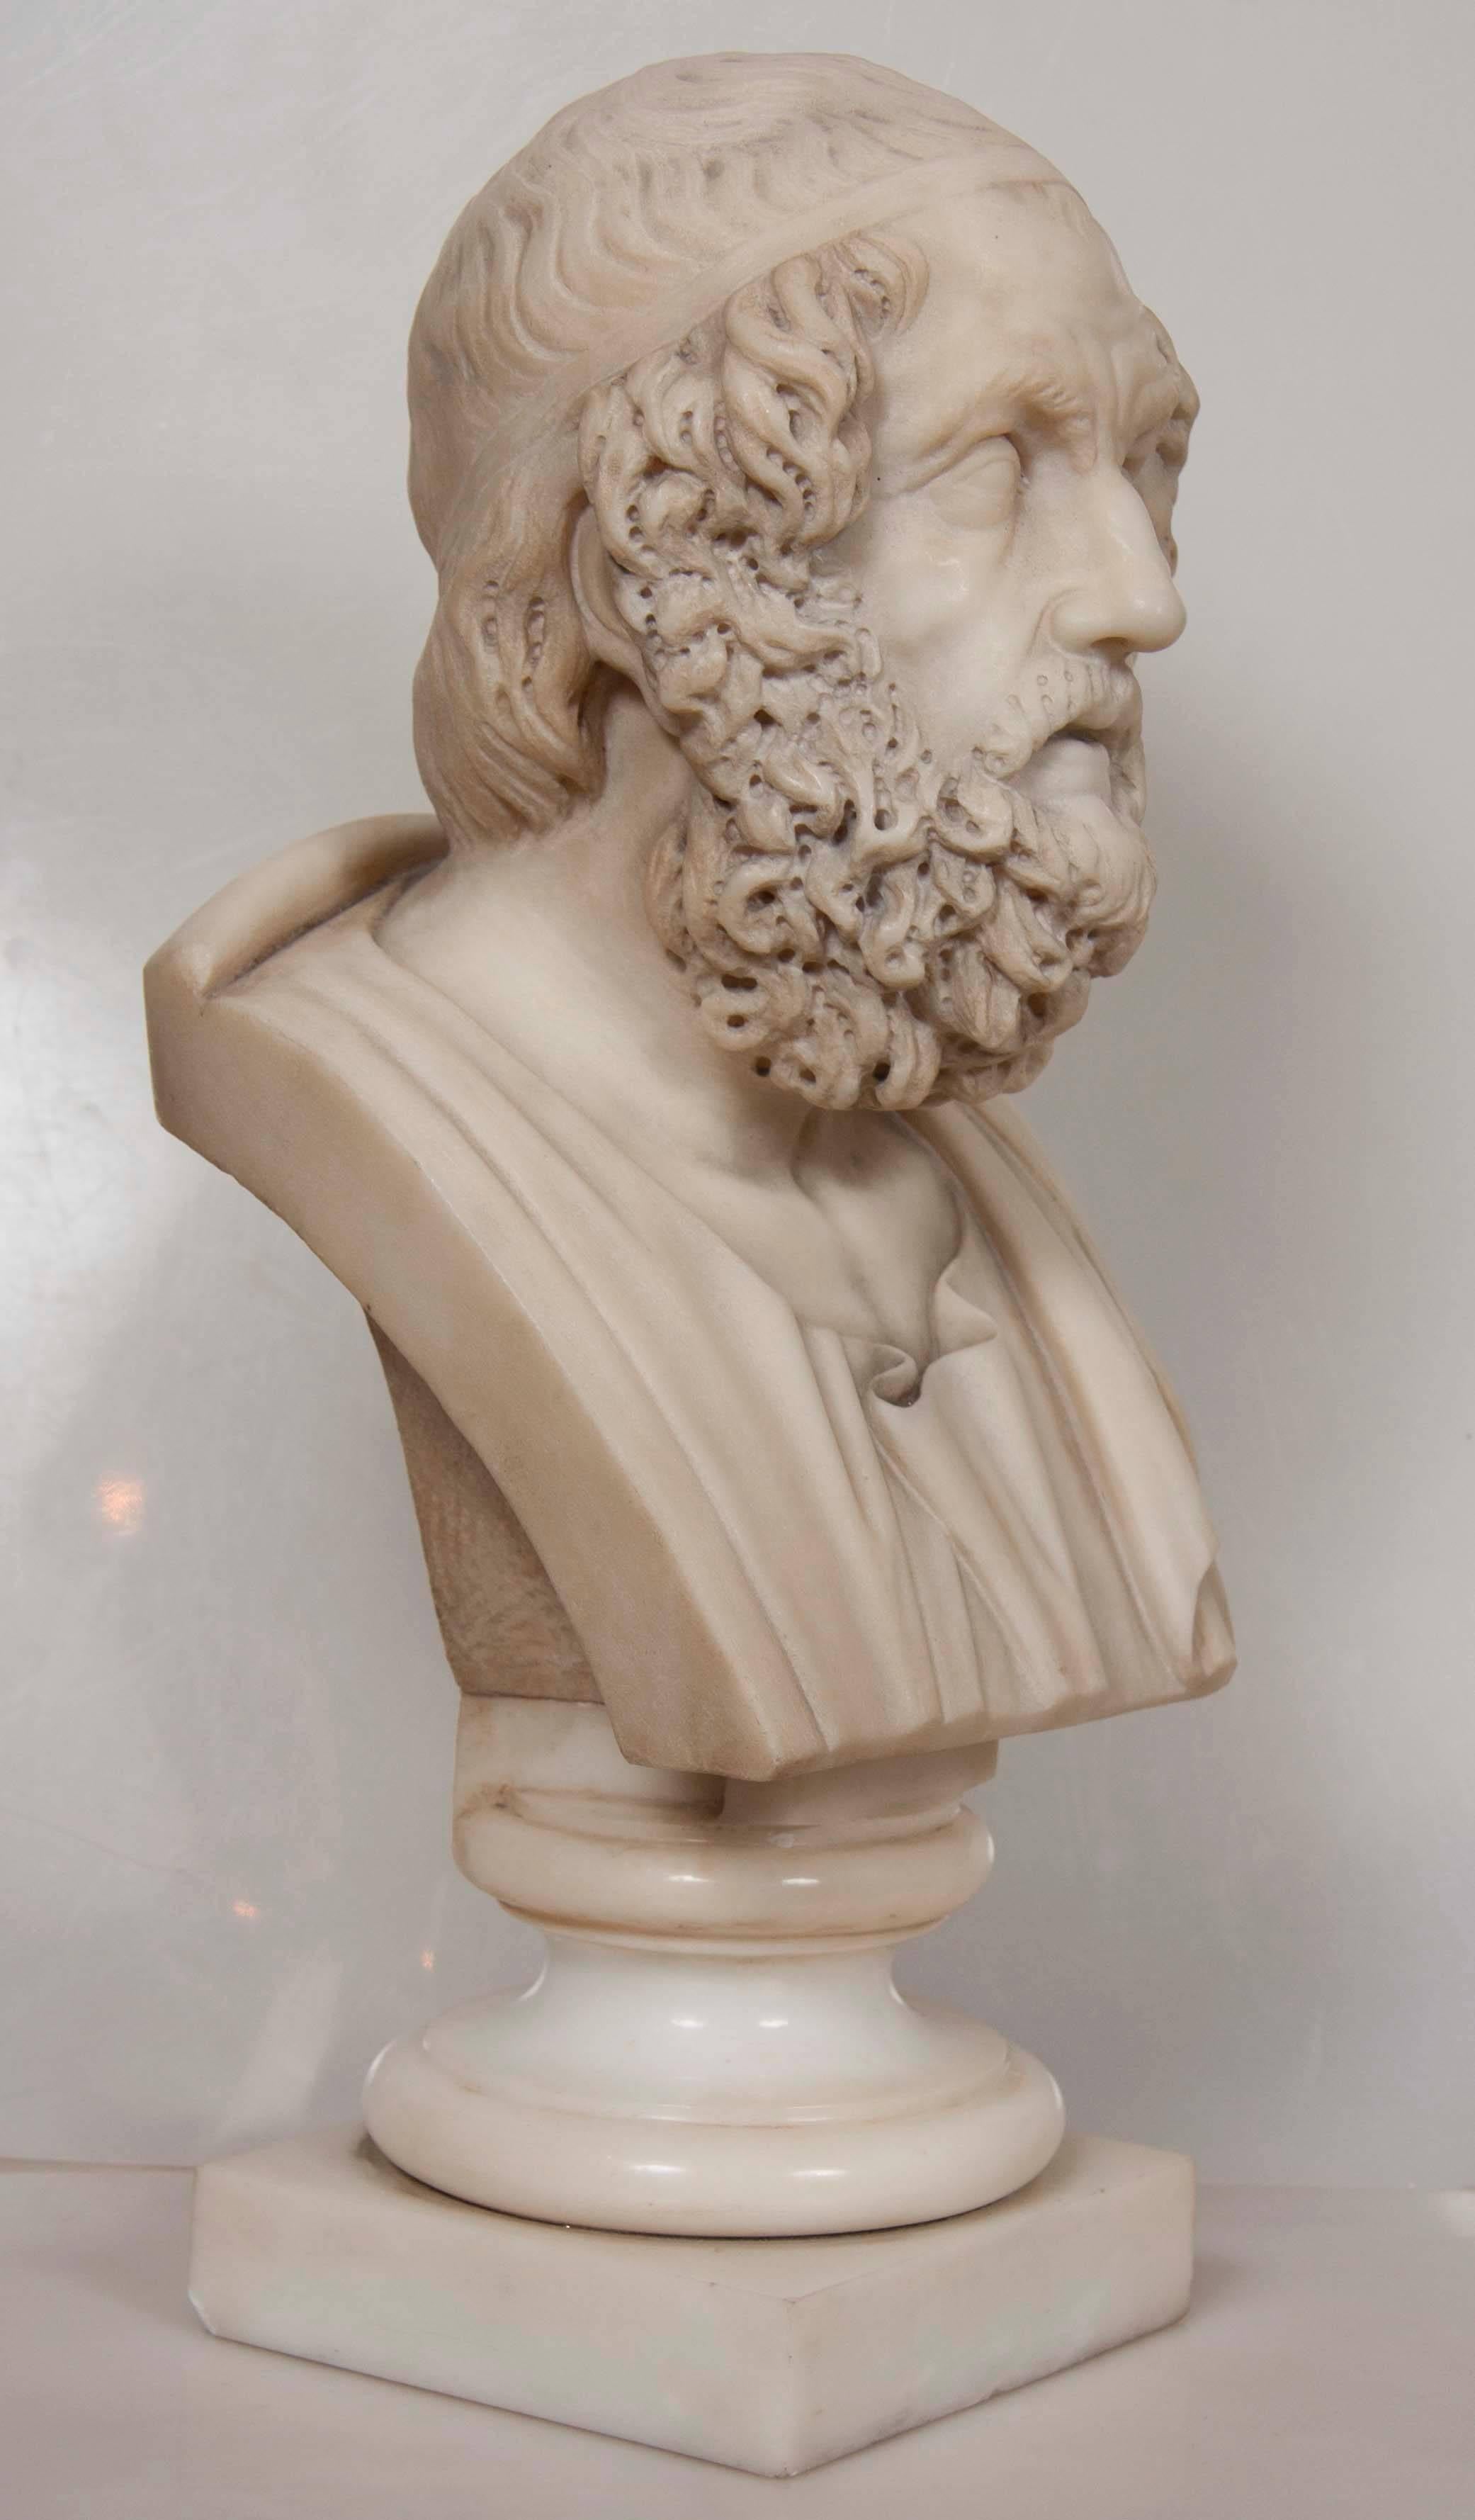 An antique solid marble bust of Homer based on 7-8th century BC model.